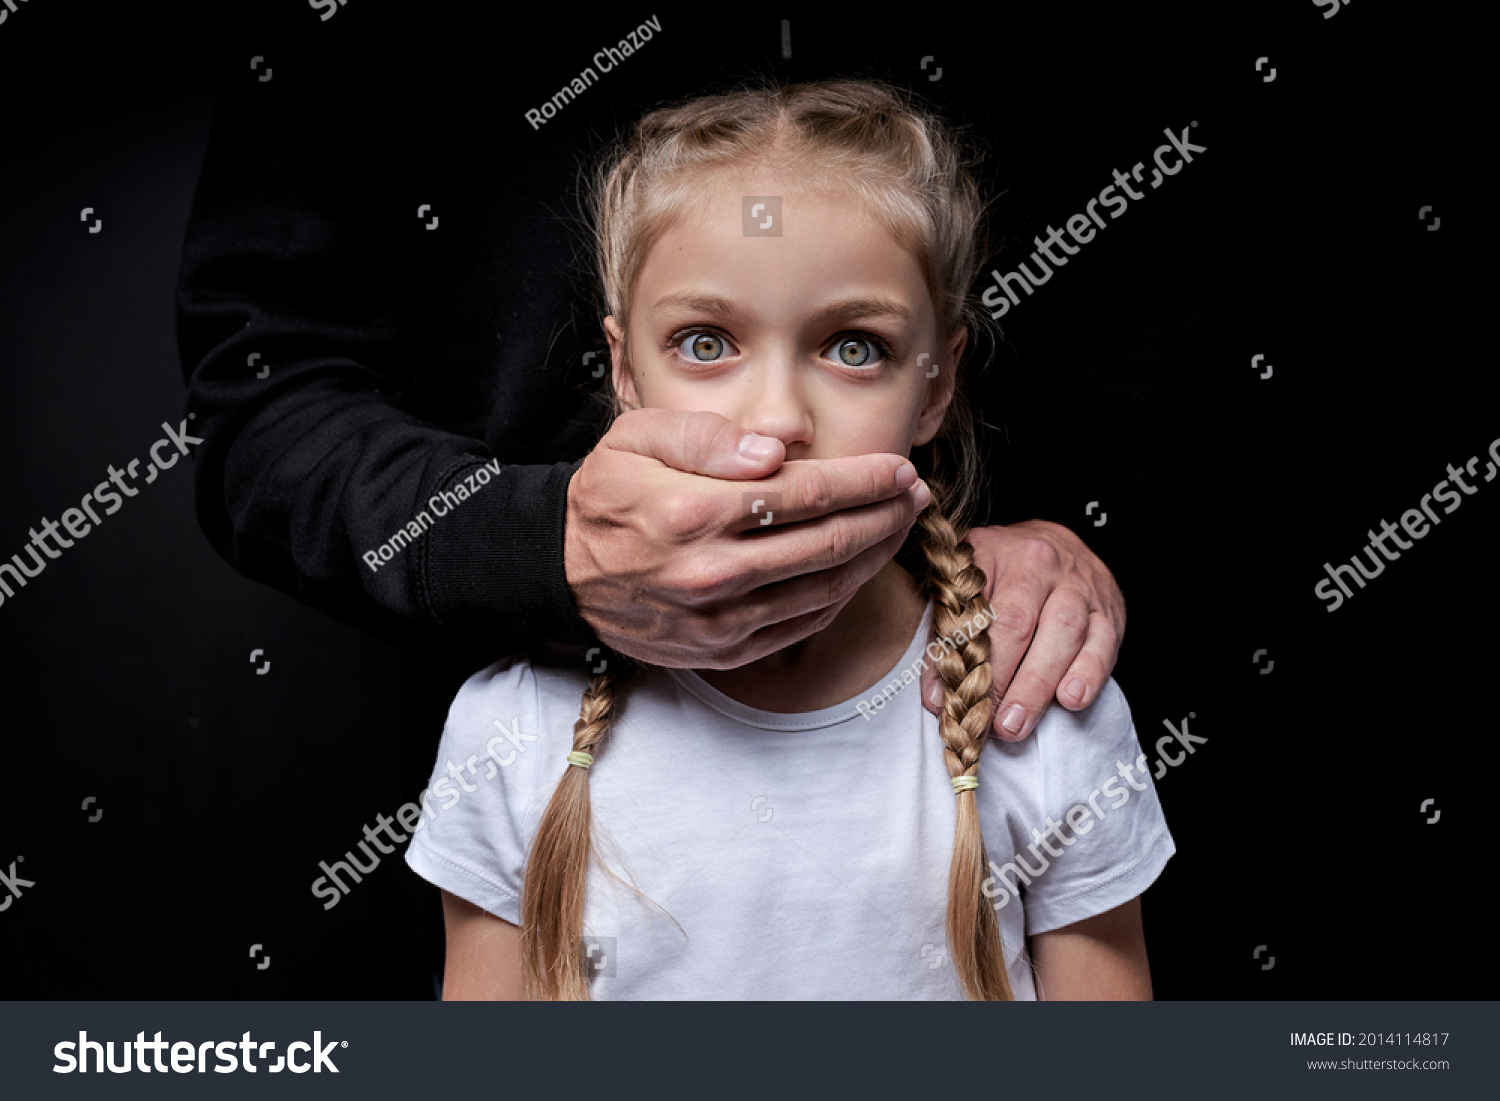 Scared girl with closed mouth by maniac killer, looking at camera with wide opened eyes, male hands on kid's shoulders, kidnapping, pedophile with child girl #2014114817